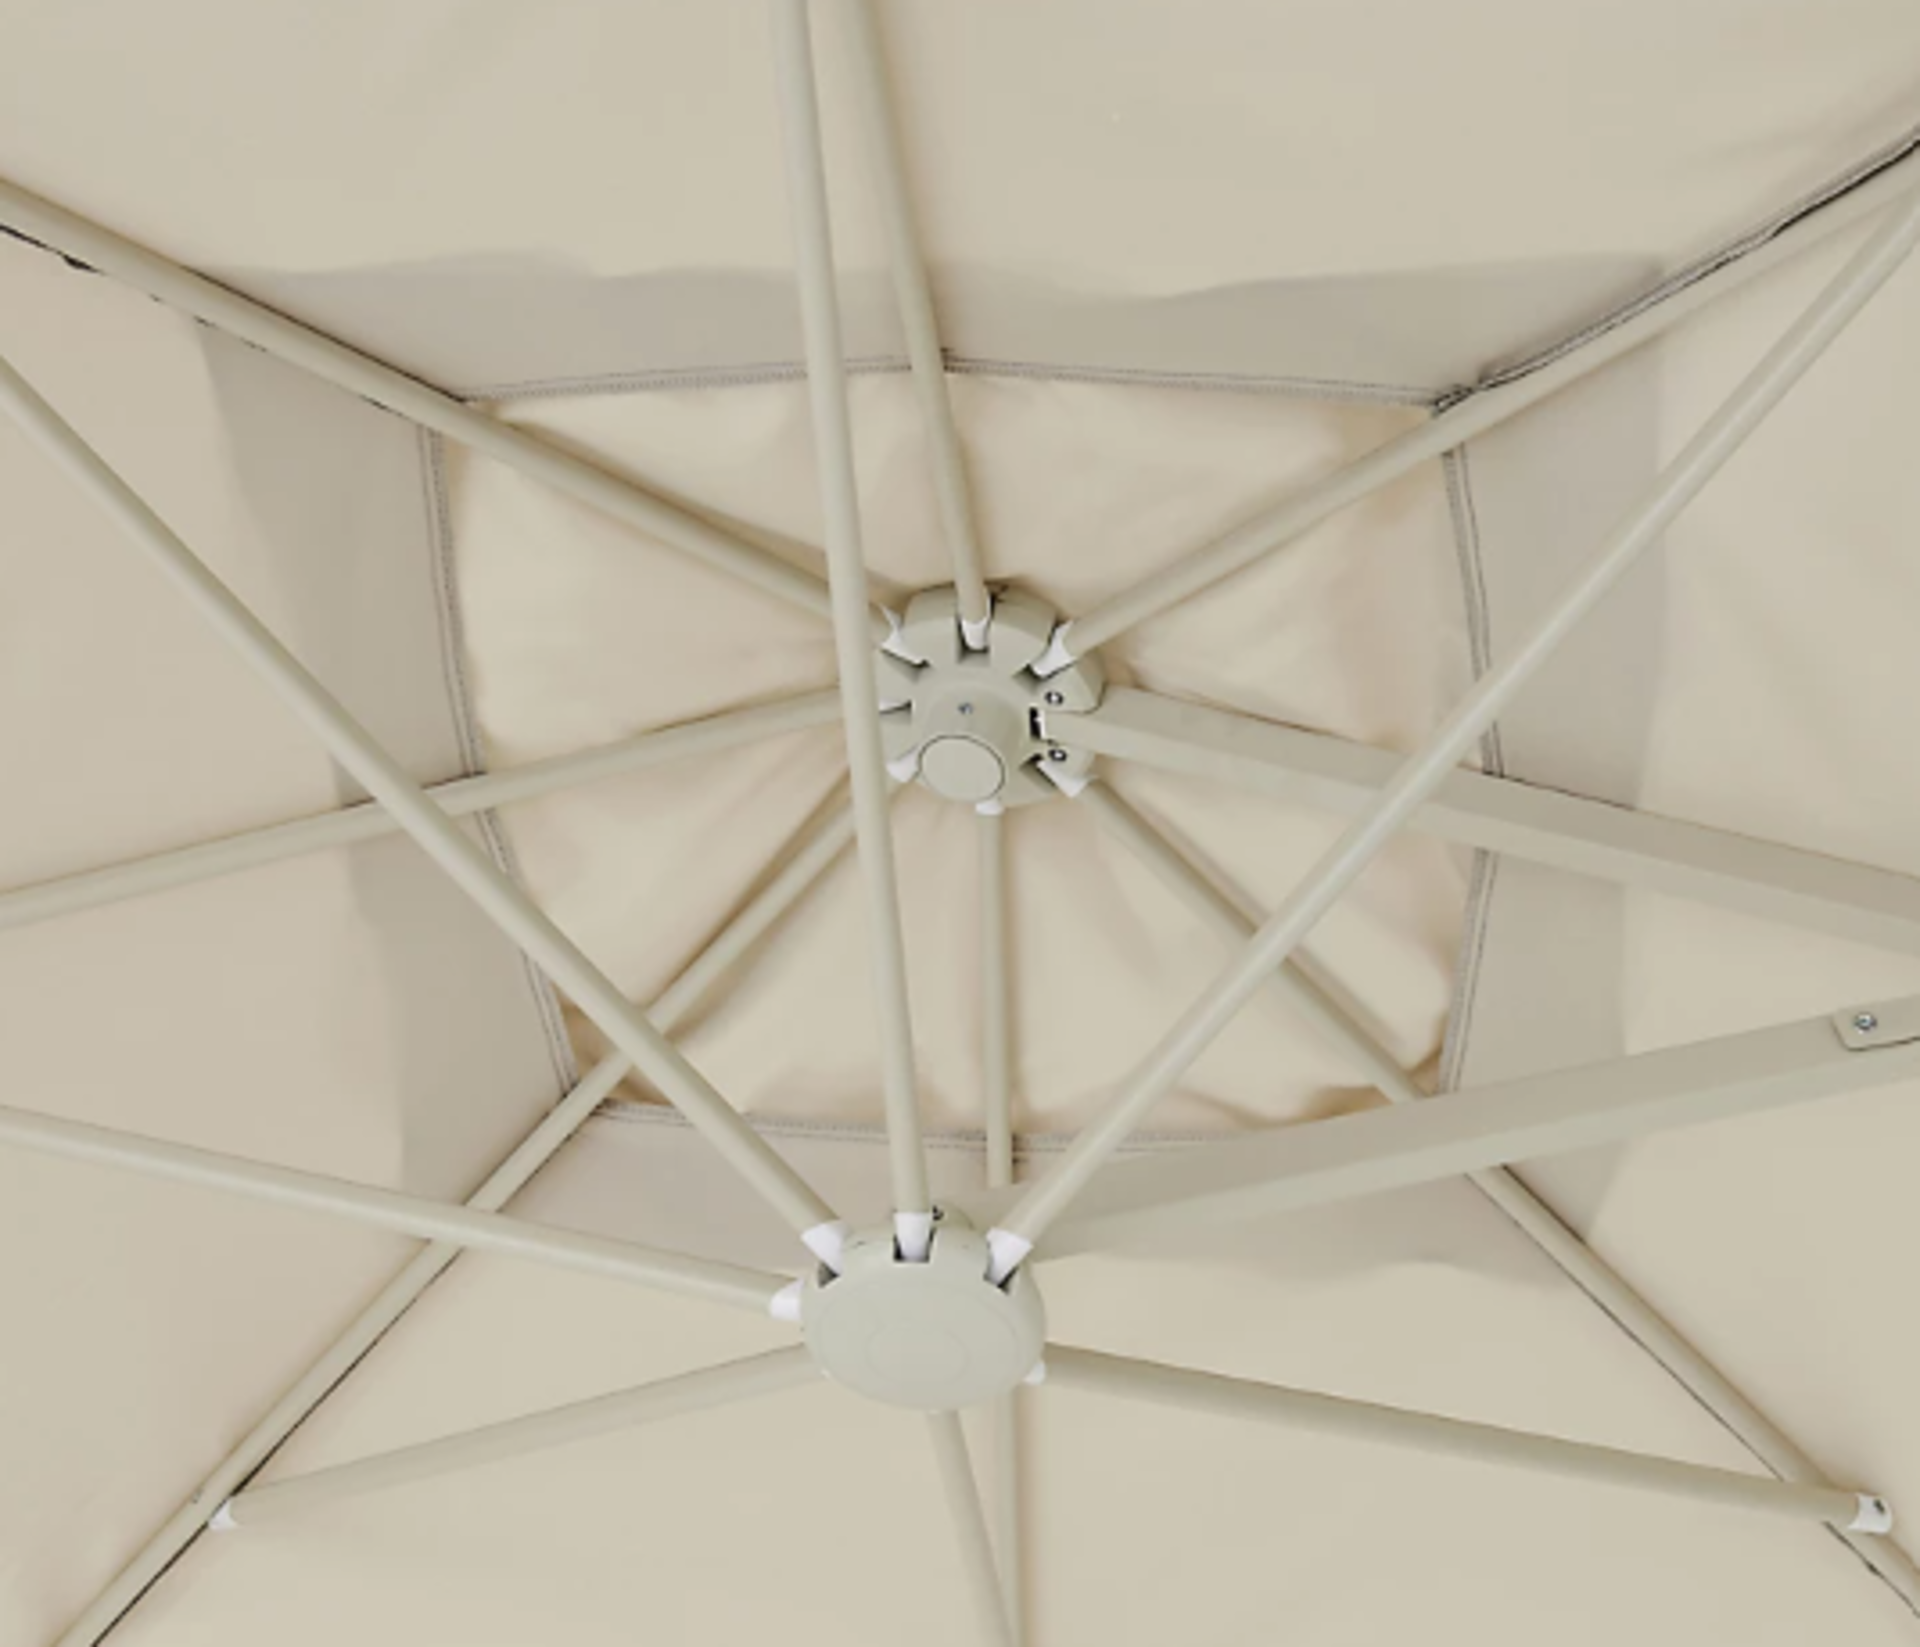 New & Boxed Luxury 2.5m Sand Overhanging Parasol- Sand. This square overhanging parasol provides - Image 6 of 8